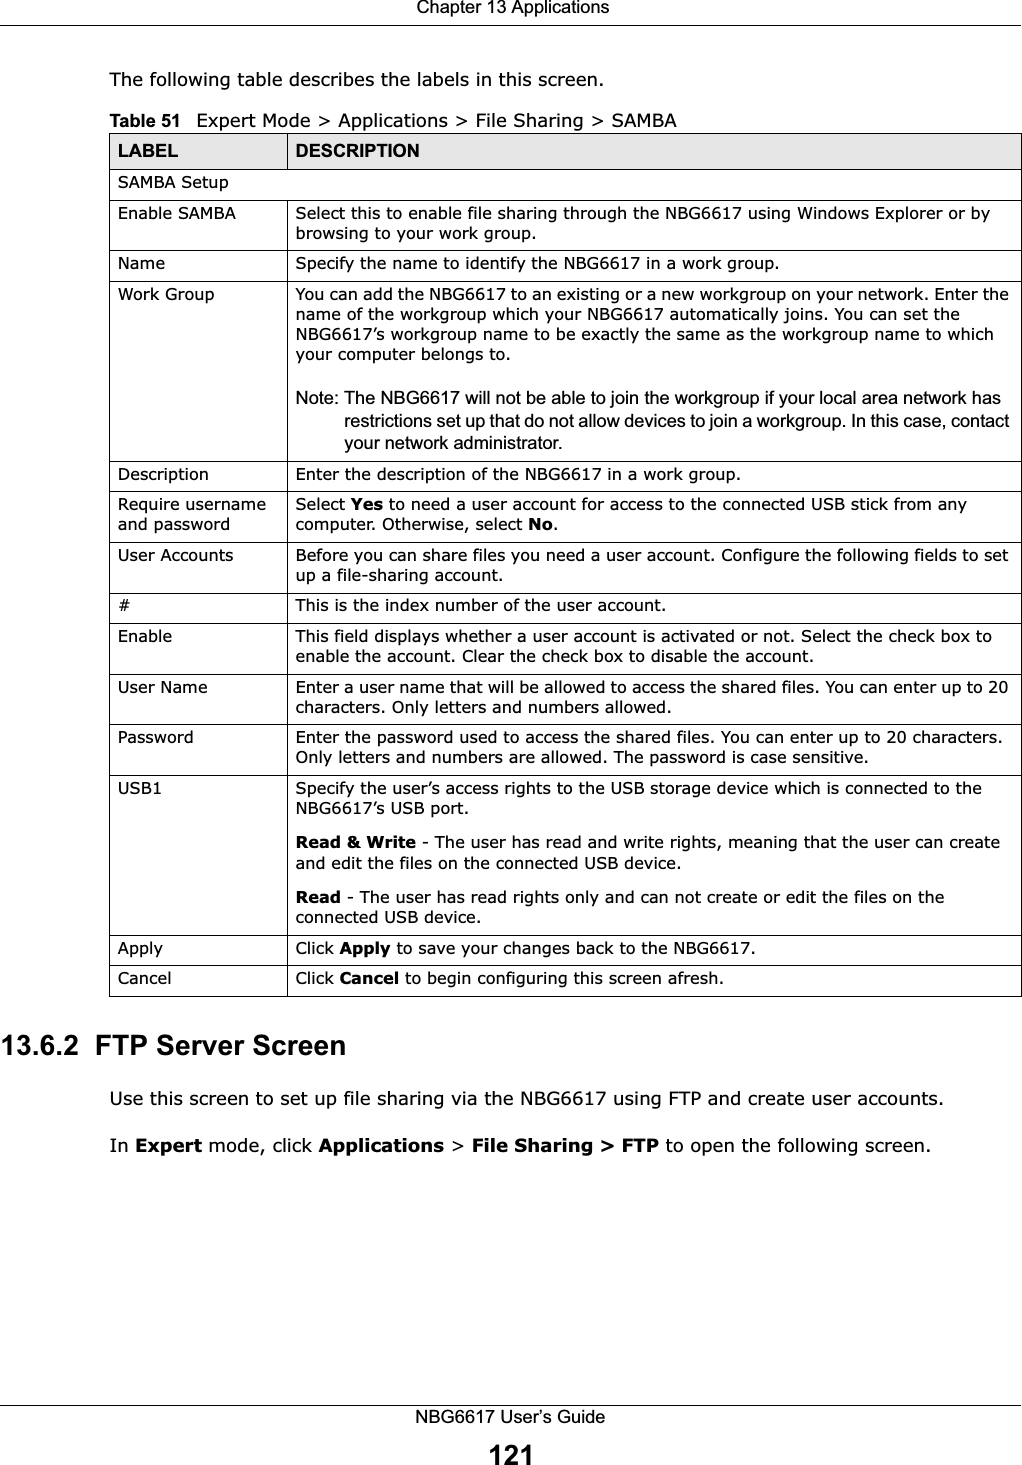  Chapter 13 ApplicationsNBG6617 User’s Guide121The following table describes the labels in this screen.13.6.2  FTP Server ScreenUse this screen to set up file sharing via the NBG6617 using FTP and create user accounts. In Expert mode, click Applications &gt; File Sharing &gt; FTP to open the following screen.Table 51   Expert Mode &gt; Applications &gt; File Sharing &gt; SAMBALABEL DESCRIPTIONSAMBA SetupEnable SAMBA Select this to enable file sharing through the NBG6617 using Windows Explorer or by browsing to your work group.Name Specify the name to identify the NBG6617 in a work group.Work Group You can add the NBG6617 to an existing or a new workgroup on your network. Enter the name of the workgroup which your NBG6617 automatically joins. You can set the NBG6617’s workgroup name to be exactly the same as the workgroup name to which your computer belongs to.Note: The NBG6617 will not be able to join the workgroup if your local area network has restrictions set up that do not allow devices to join a workgroup. In this case, contact your network administrator.Description Enter the description of the NBG6617 in a work group.Require username and passwordSelect Yes to need a user account for access to the connected USB stick from any computer. Otherwise, select No.User Accounts Before you can share files you need a user account. Configure the following fields to set up a file-sharing account. #This is the index number of the user account.Enable This field displays whether a user account is activated or not. Select the check box to enable the account. Clear the check box to disable the account.User Name Enter a user name that will be allowed to access the shared files. You can enter up to 20 characters. Only letters and numbers allowed.Password Enter the password used to access the shared files. You can enter up to 20 characters. Only letters and numbers are allowed. The password is case sensitive.USB1 Specify the user’s access rights to the USB storage device which is connected to the NBG6617’s USB port.Read &amp; Write - The user has read and write rights, meaning that the user can create and edit the files on the connected USB device.Read - The user has read rights only and can not create or edit the files on the connected USB device.Apply Click Apply to save your changes back to the NBG6617.Cancel Click Cancel to begin configuring this screen afresh.